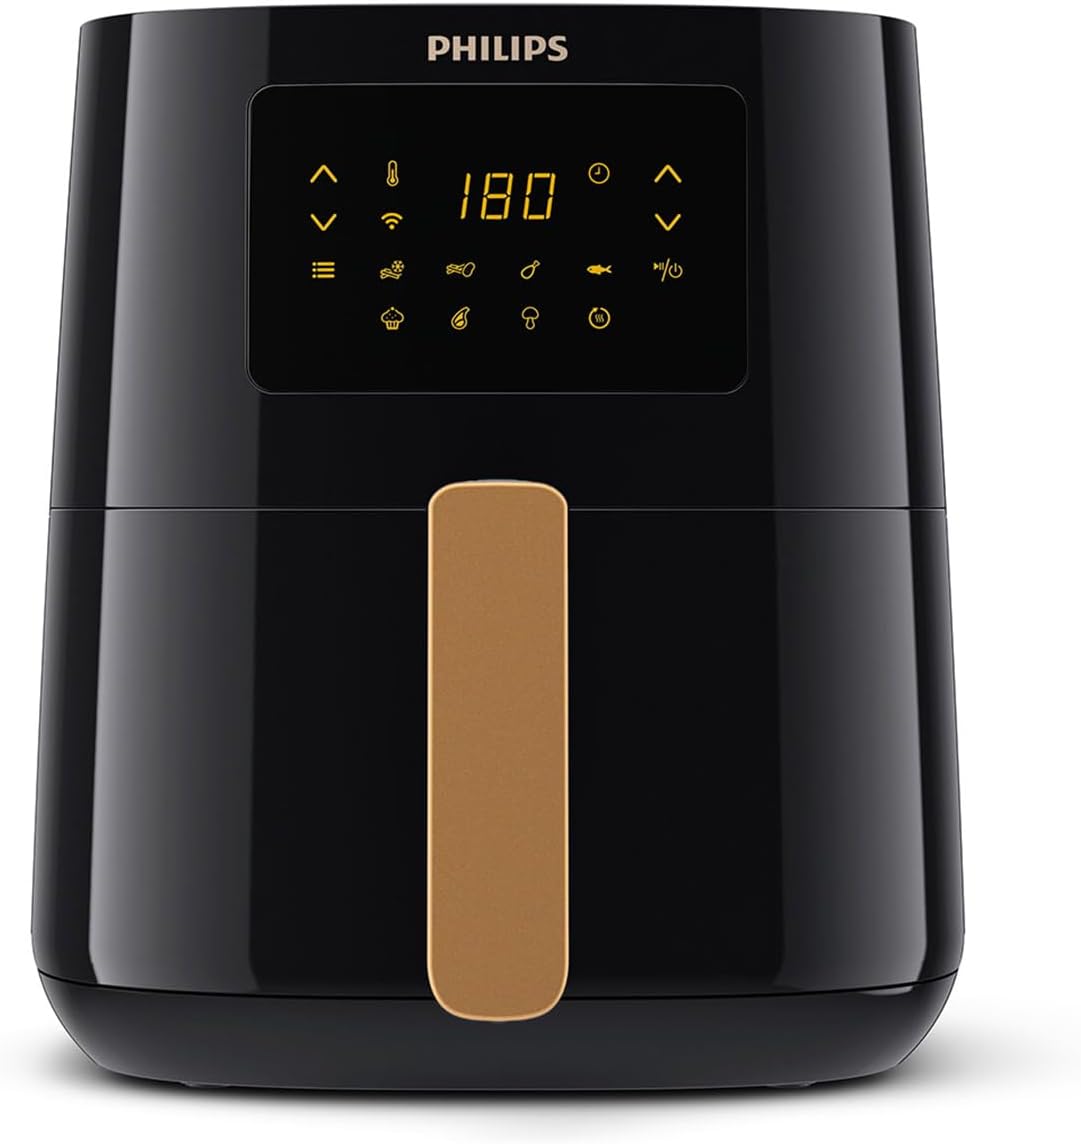 Philips Airfryer 5000 Series Connected, Rapid Air Technology 4.1 L (0.8 kg), Connected, Black + Copper Handle (HD9255/80)